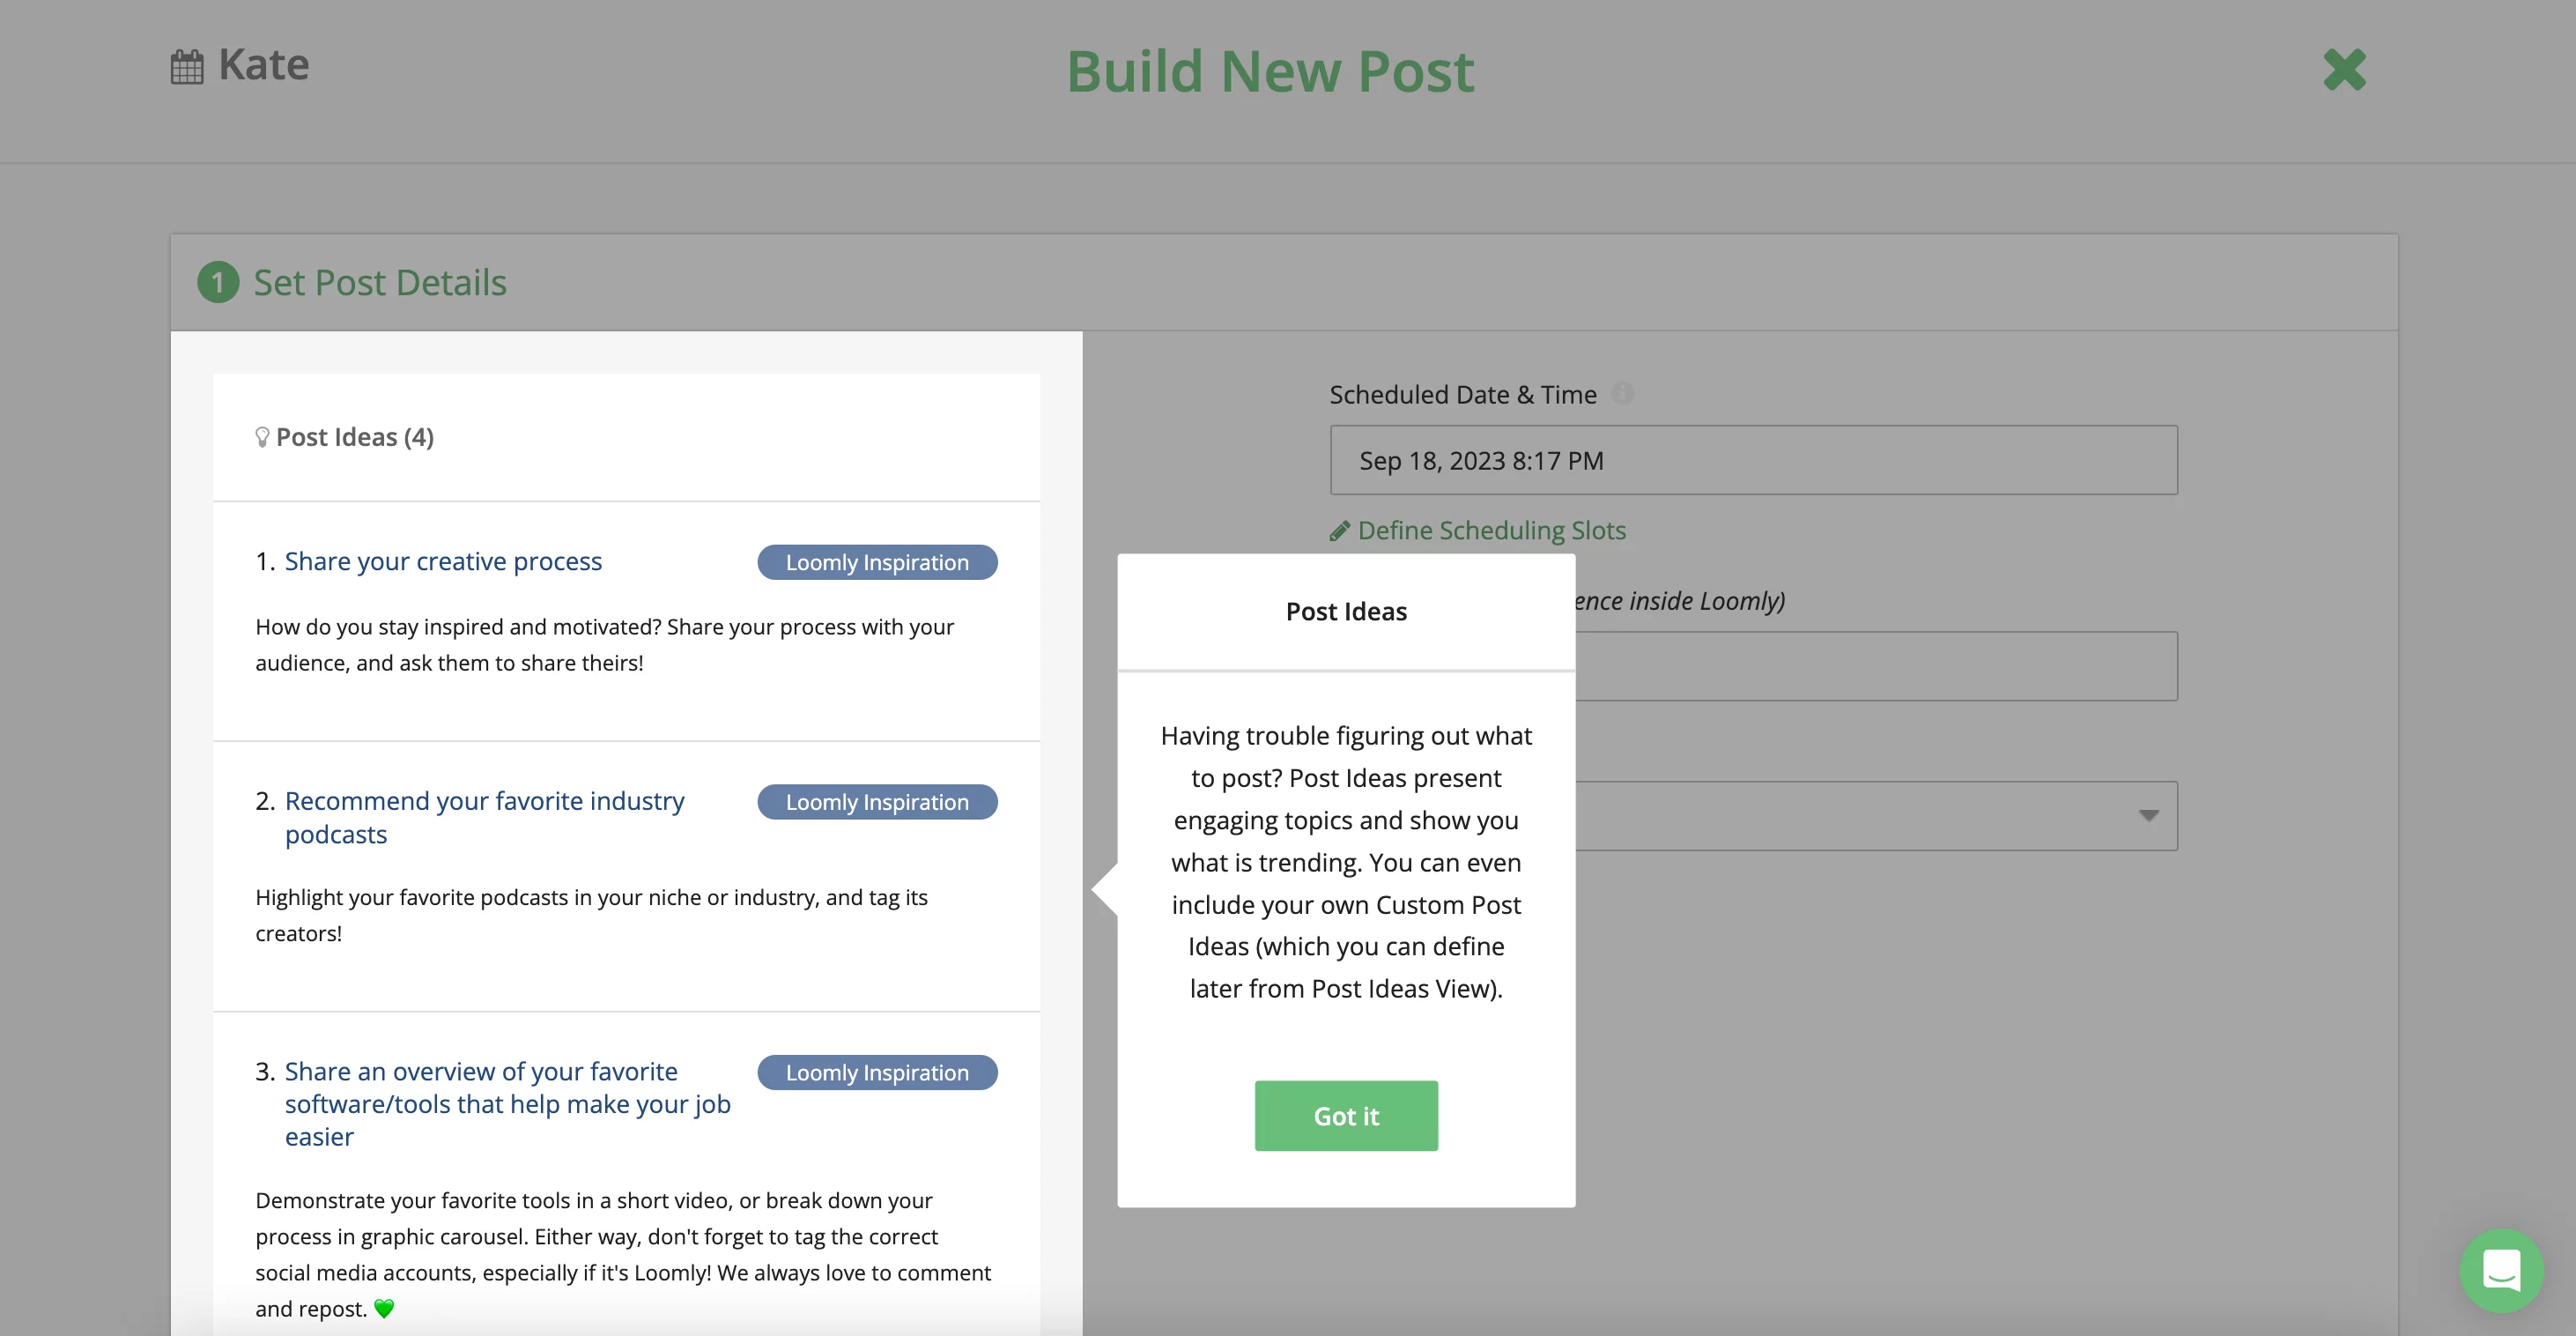 Loomly Build new post interface, with 4 automatically generated post ideas.